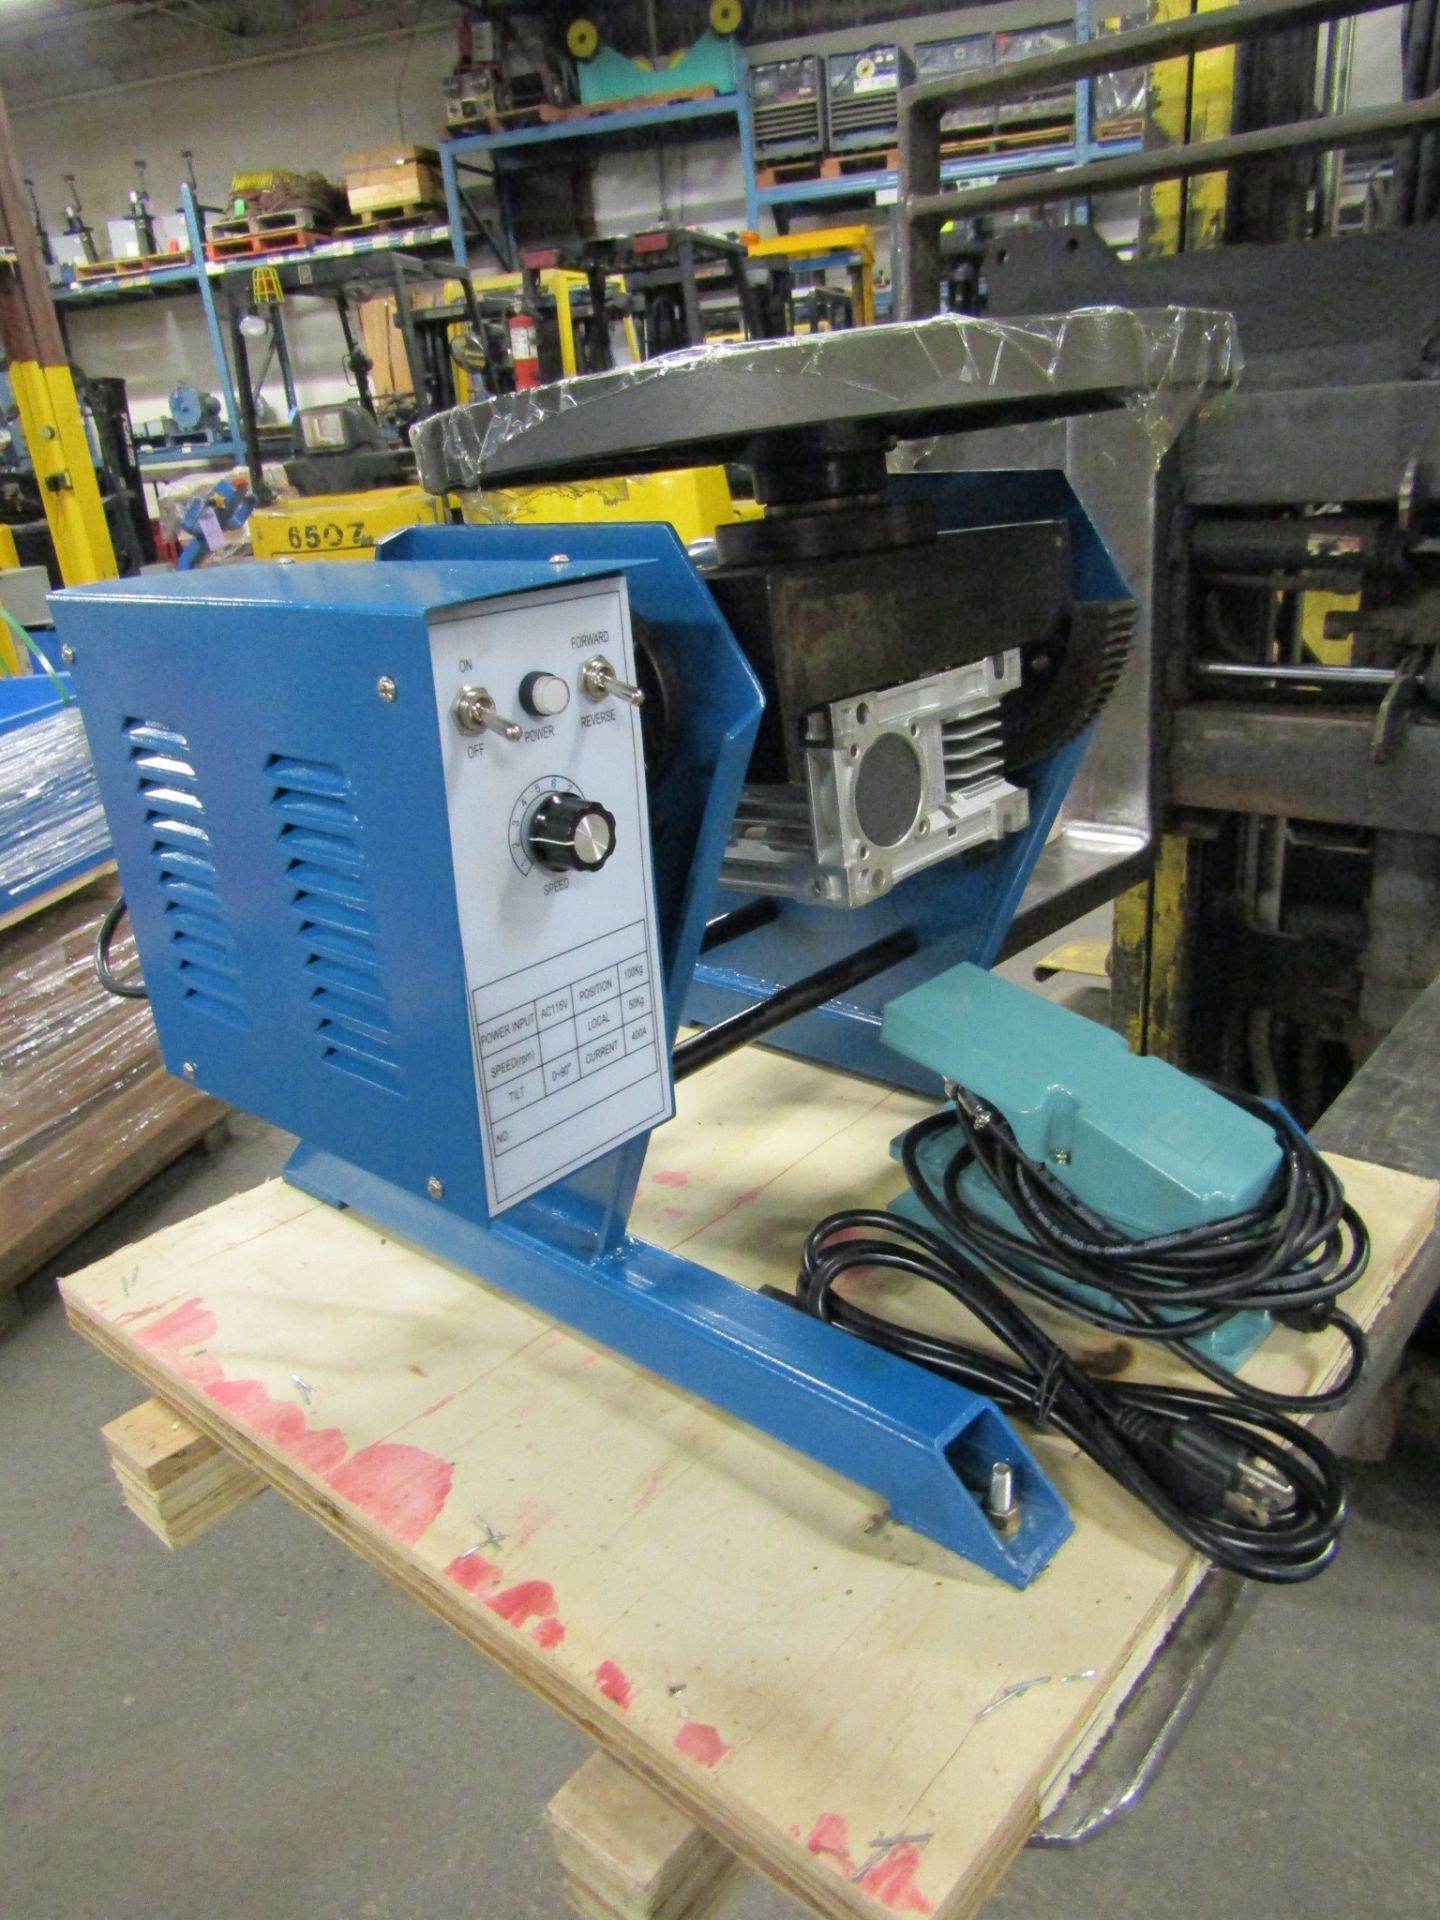 Verner model VD-300 WELDING POSITIONER 300lbs capacity - tilt and rotate with variable speed drive